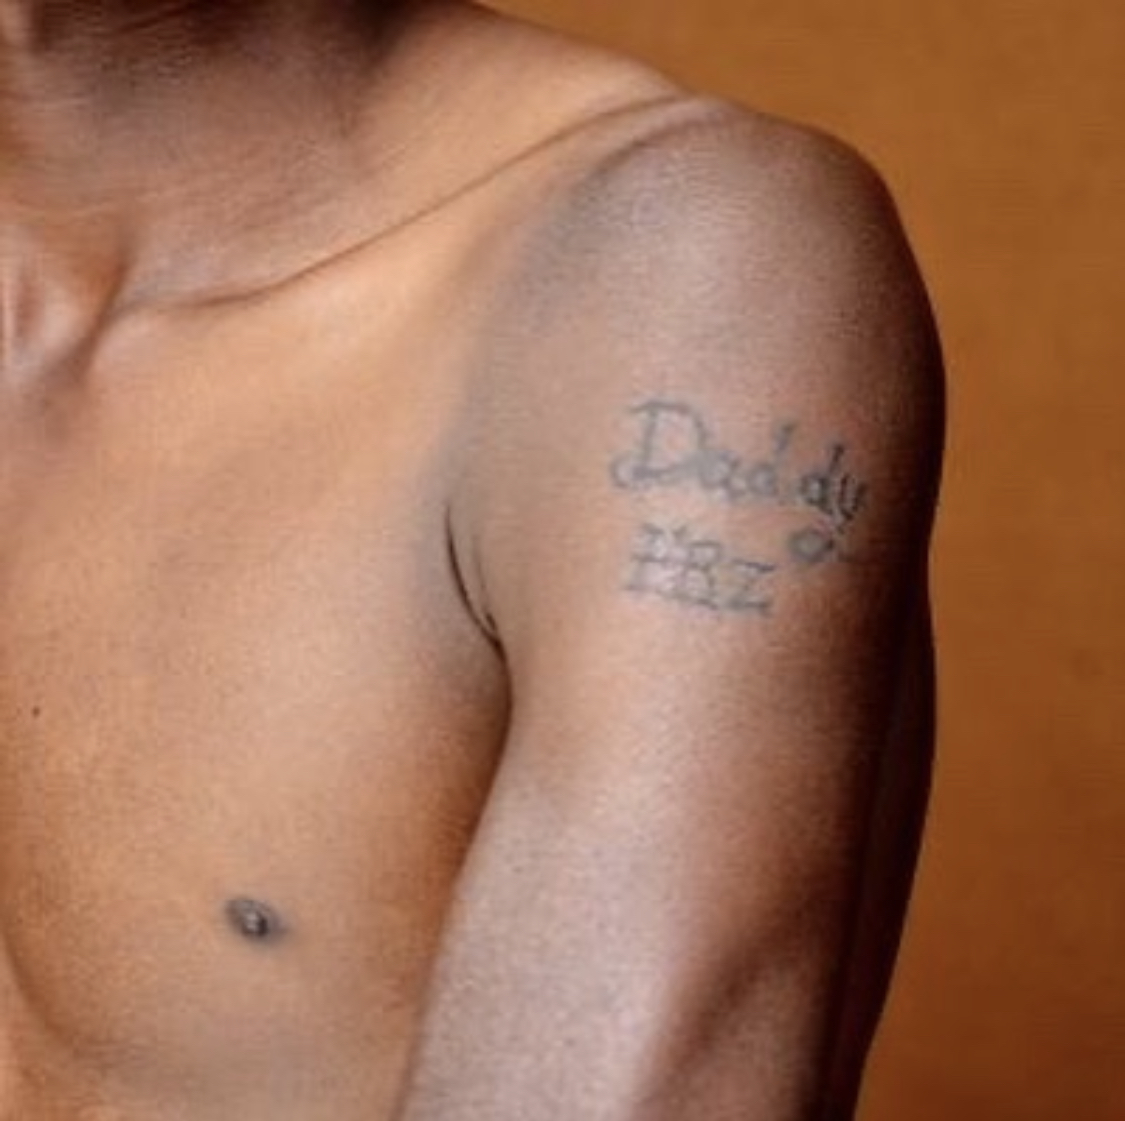 Student tattoos Daddy freeze name on body to appreciate him for paying school fees years ago [photos]